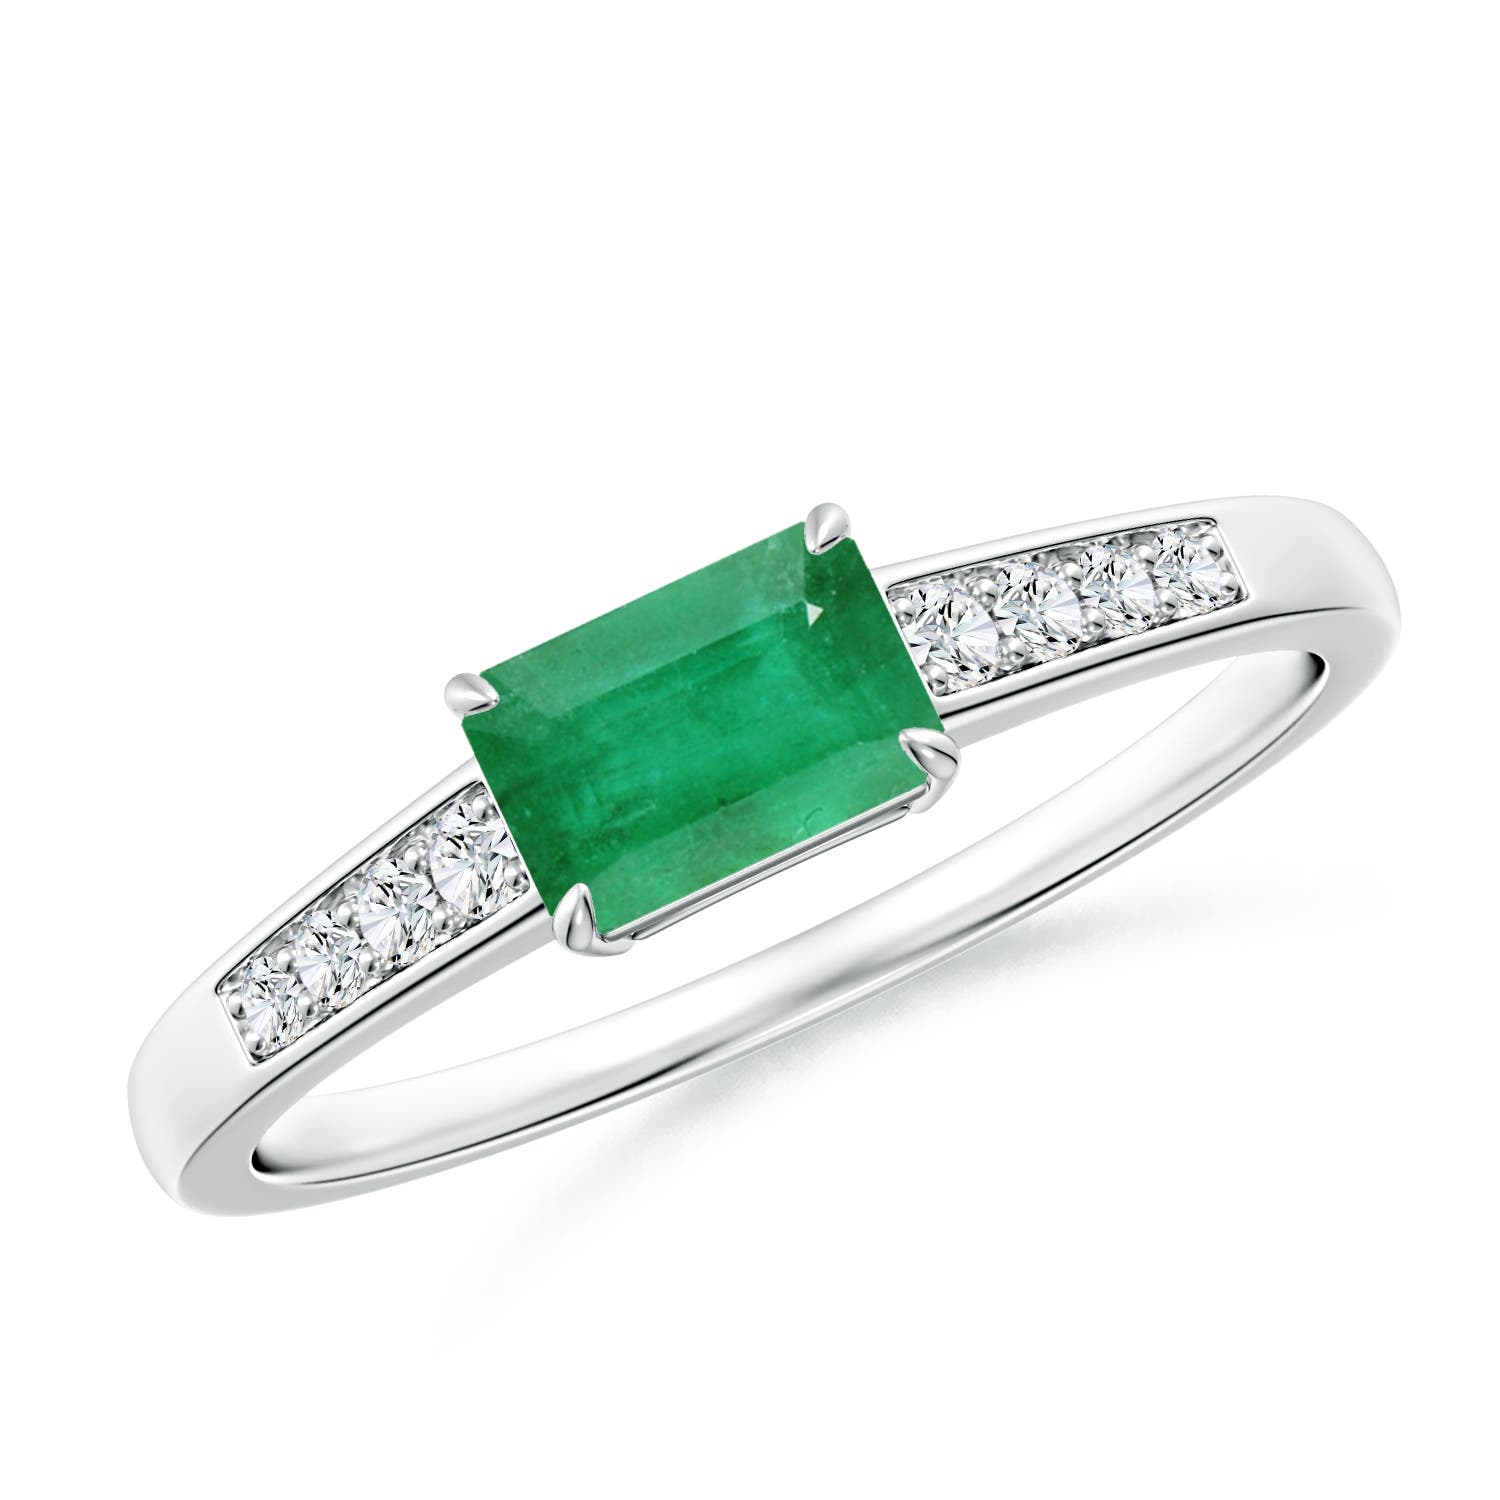 A - Emerald / 0.61 CT / 14 KT White Gold